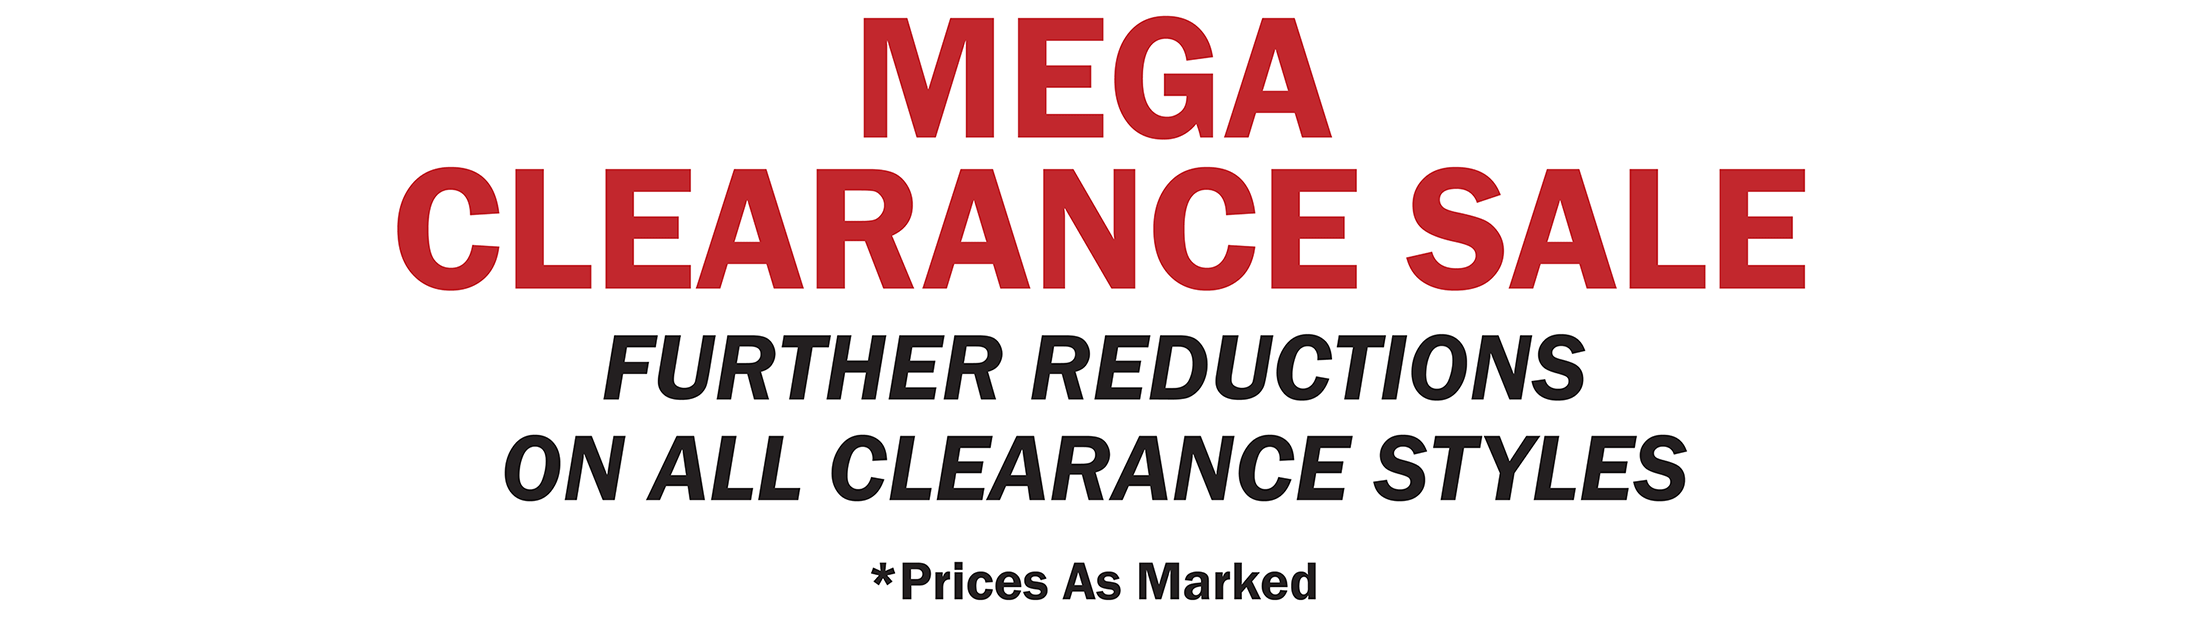 Mega Clearance Sale! - Further Reductions on all Clearance Styles